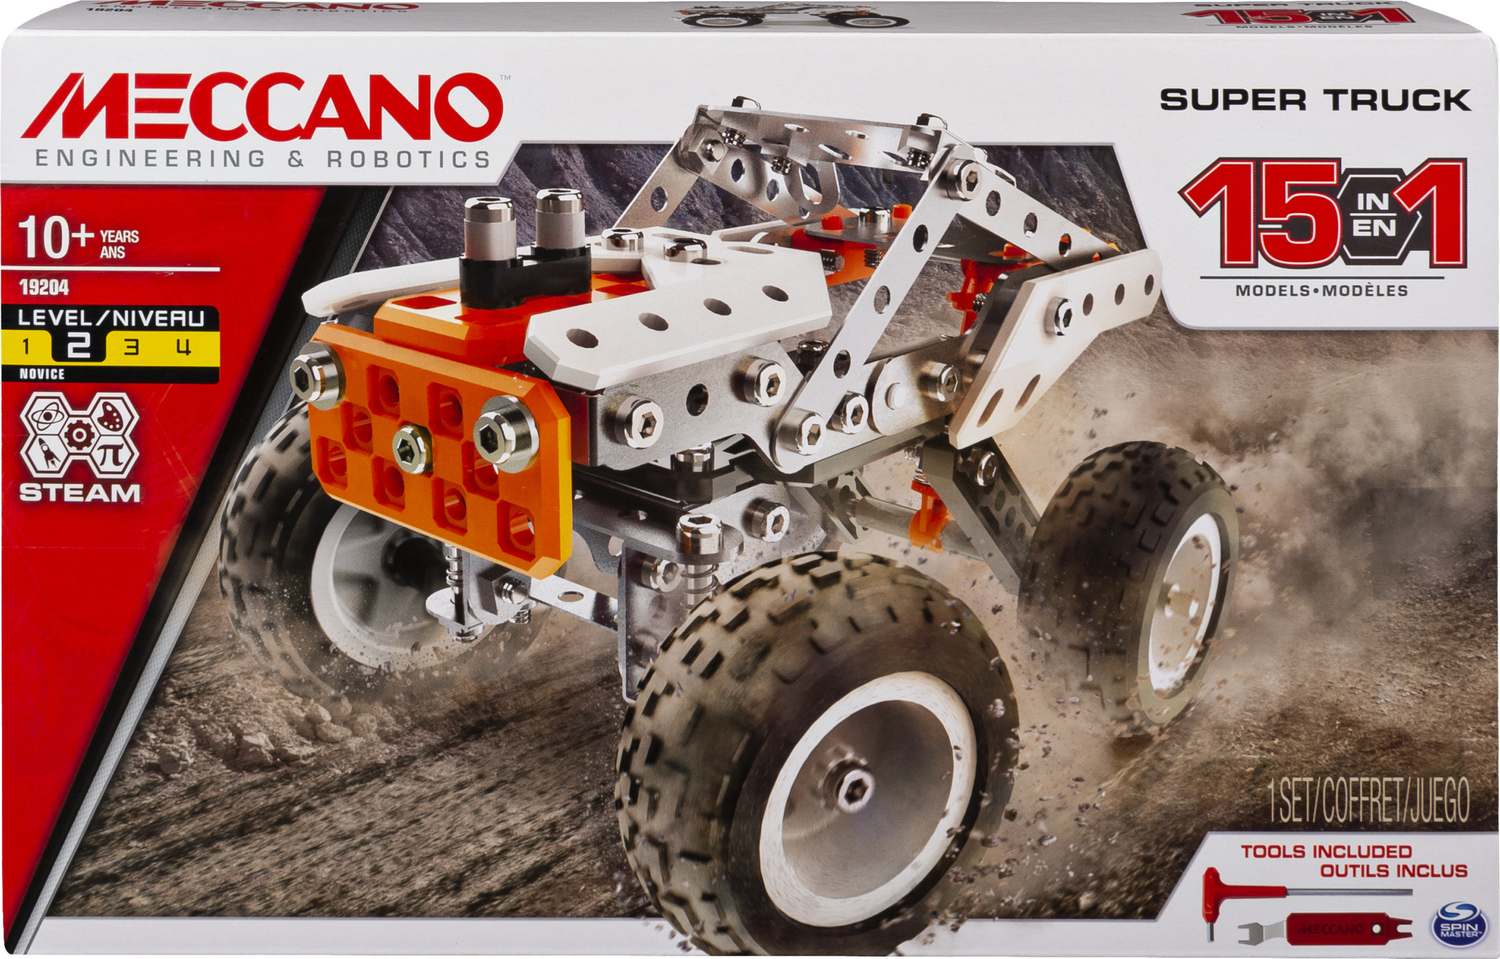 Meccano, 15-in-1 Super Truck, S.T.E.A.M. Building Kit, for Ages 10